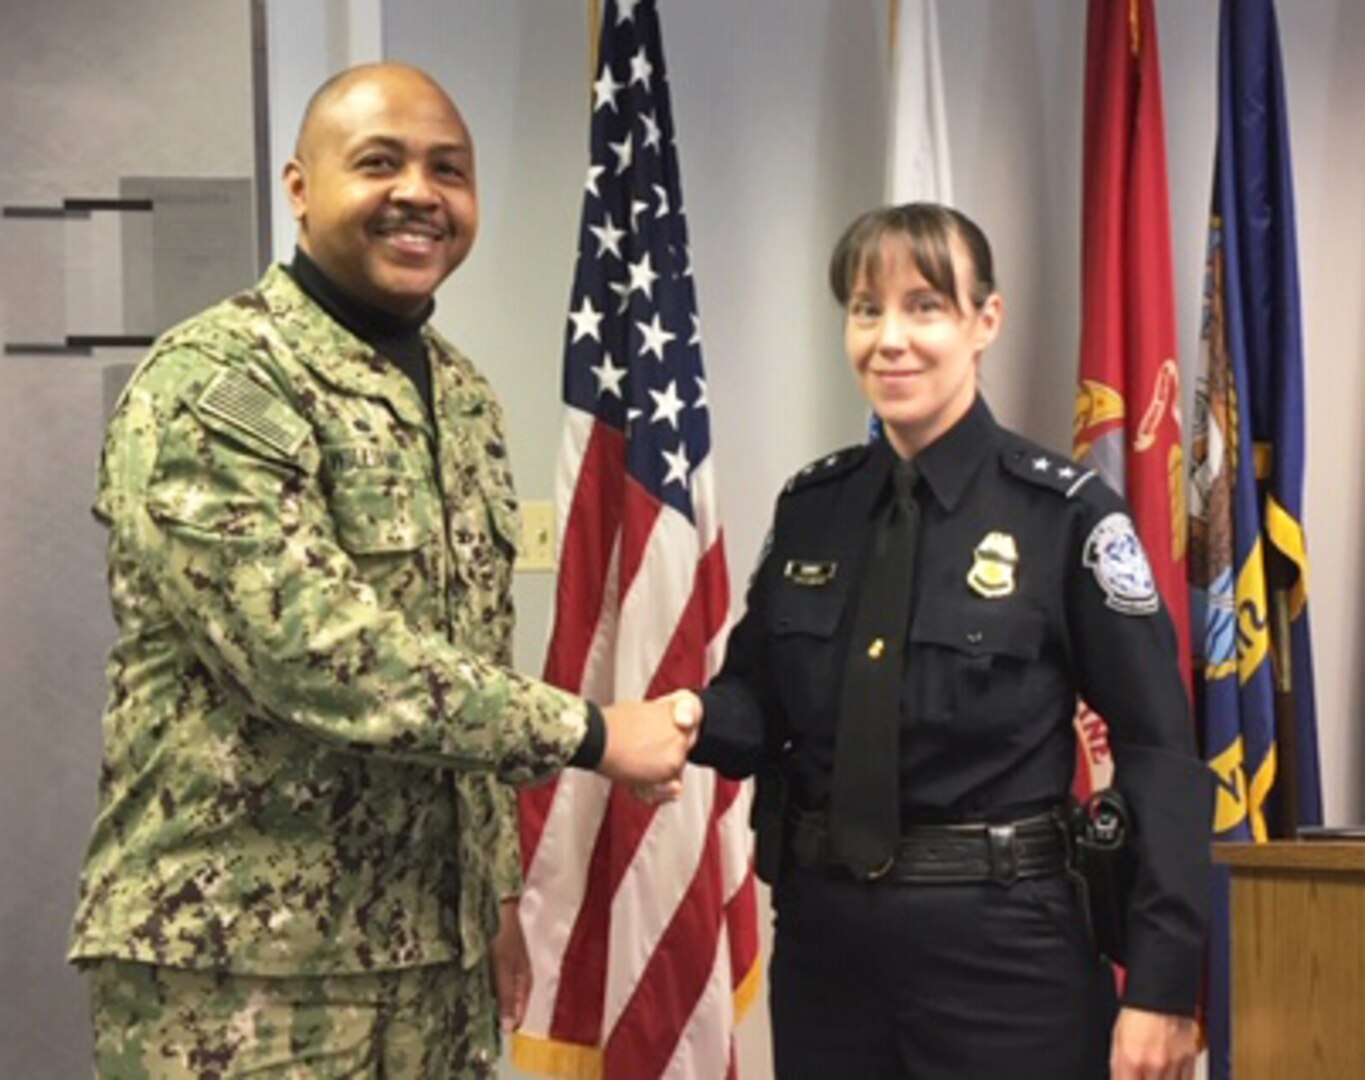 A Navy military officer shakes hands with a civil servant wearing a black Customs and Border Protection uniform